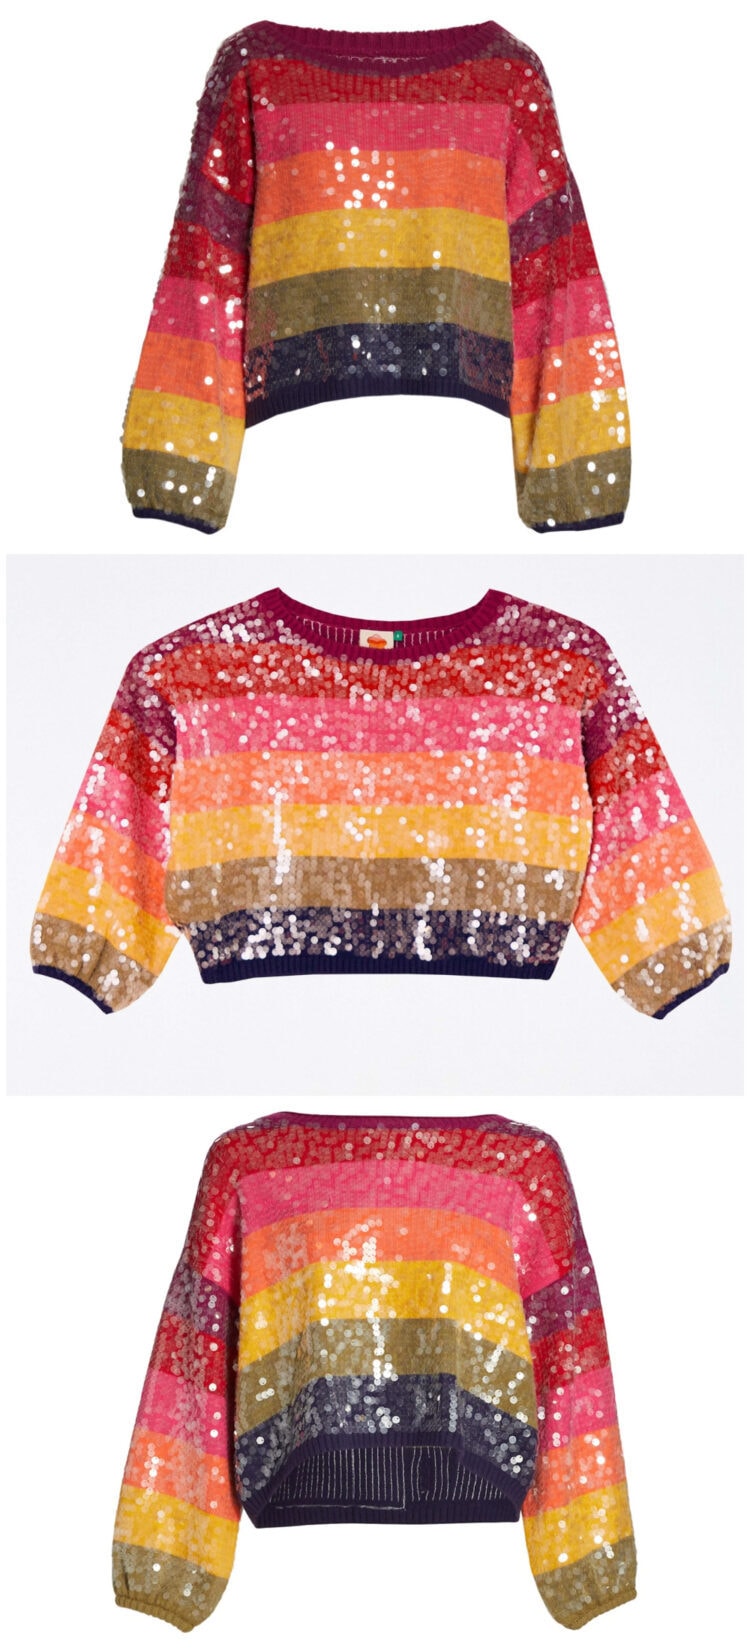 Image is of the same rainbow striped sequined sweater from FARM Rio but photographed by three different retailers to show how they look to be different fits and colors. This is to explain why apparel bracketing is a trend and how retailers can reduce consumer bracketing.